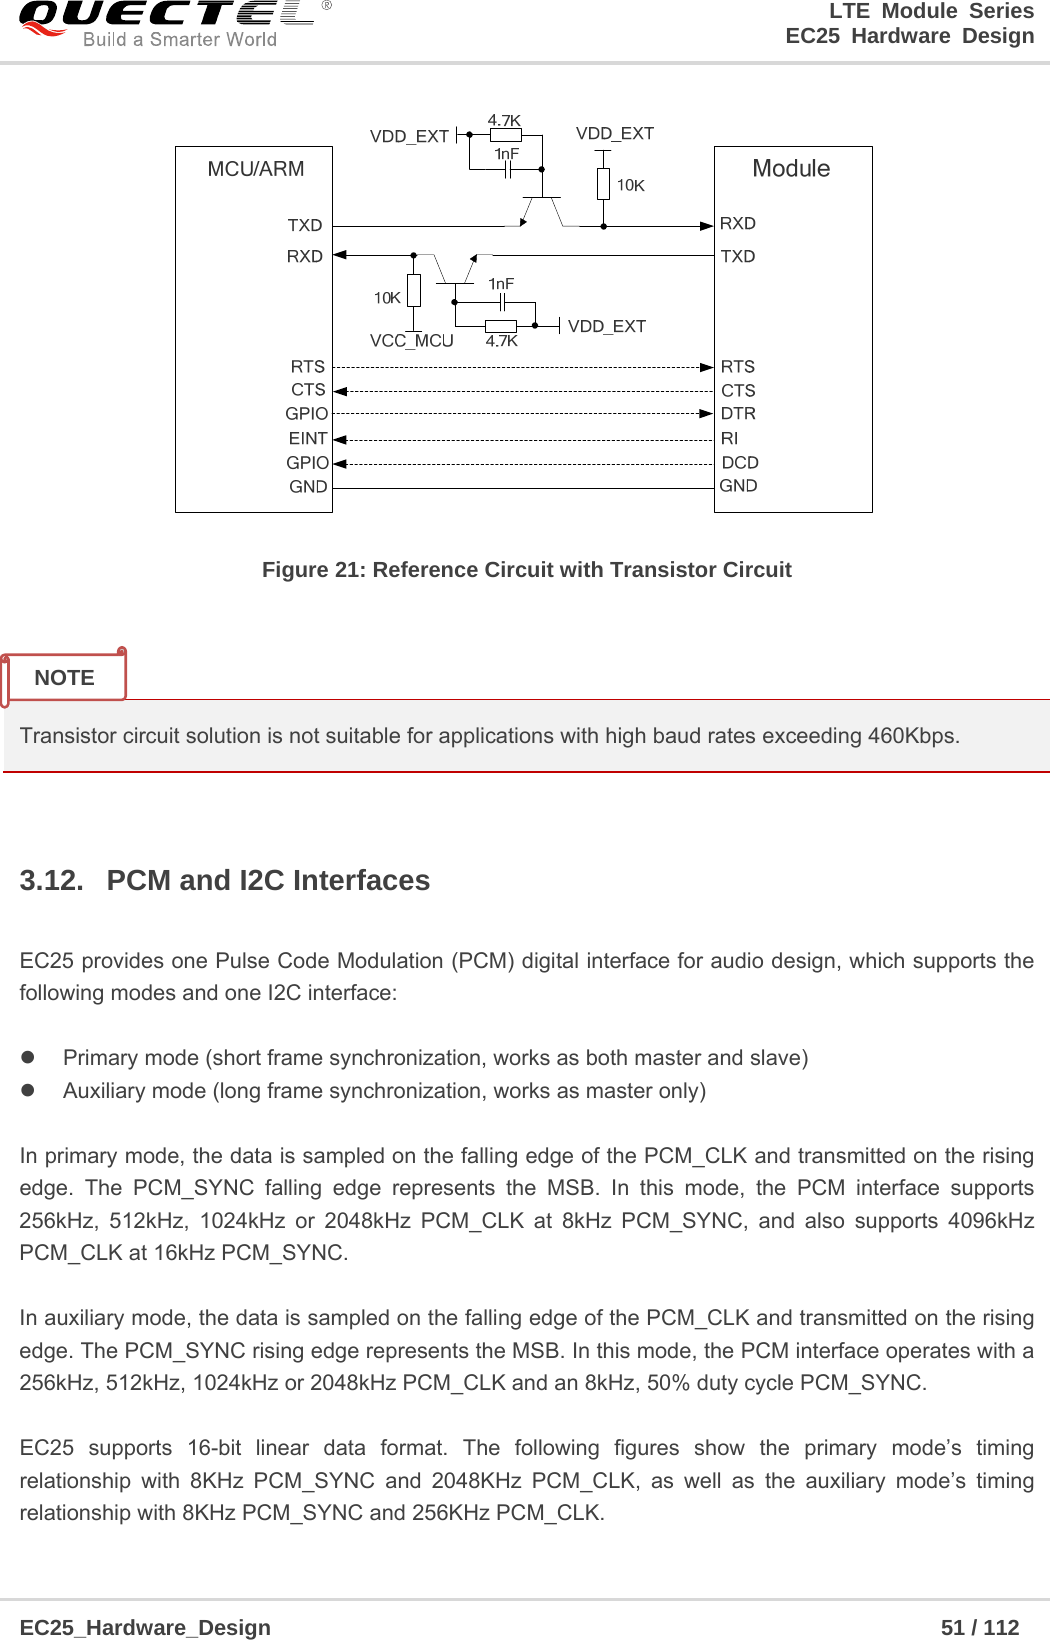 LTE Module Series                                                  EC25 Hardware Design  EC25_Hardware_Design                                                             51 / 112     Figure 21: Reference Circuit with Transistor Circuit    Transistor circuit solution is not suitable for applications with high baud rates exceeding 460Kbps.  3.12.  PCM and I2C Interfaces  EC25 provides one Pulse Code Modulation (PCM) digital interface for audio design, which supports the following modes and one I2C interface:    Primary mode (short frame synchronization, works as both master and slave)   Auxiliary mode (long frame synchronization, works as master only)  In primary mode, the data is sampled on the falling edge of the PCM_CLK and transmitted on the rising edge. The PCM_SYNC falling edge represents the MSB. In this mode, the PCM interface supports 256kHz, 512kHz, 1024kHz or 2048kHz PCM_CLK at 8kHz PCM_SYNC, and also supports 4096kHz PCM_CLK at 16kHz PCM_SYNC.  In auxiliary mode, the data is sampled on the falling edge of the PCM_CLK and transmitted on the rising edge. The PCM_SYNC rising edge represents the MSB. In this mode, the PCM interface operates with a 256kHz, 512kHz, 1024kHz or 2048kHz PCM_CLK and an 8kHz, 50% duty cycle PCM_SYNC.  EC25 supports 16-bit linear data format. The following figures show the primary mode’s timing relationship with 8KHz PCM_SYNC and 2048KHz PCM_CLK, as well as the auxiliary mode’s timing relationship with 8KHz PCM_SYNC and 256KHz PCM_CLK. NOTE 